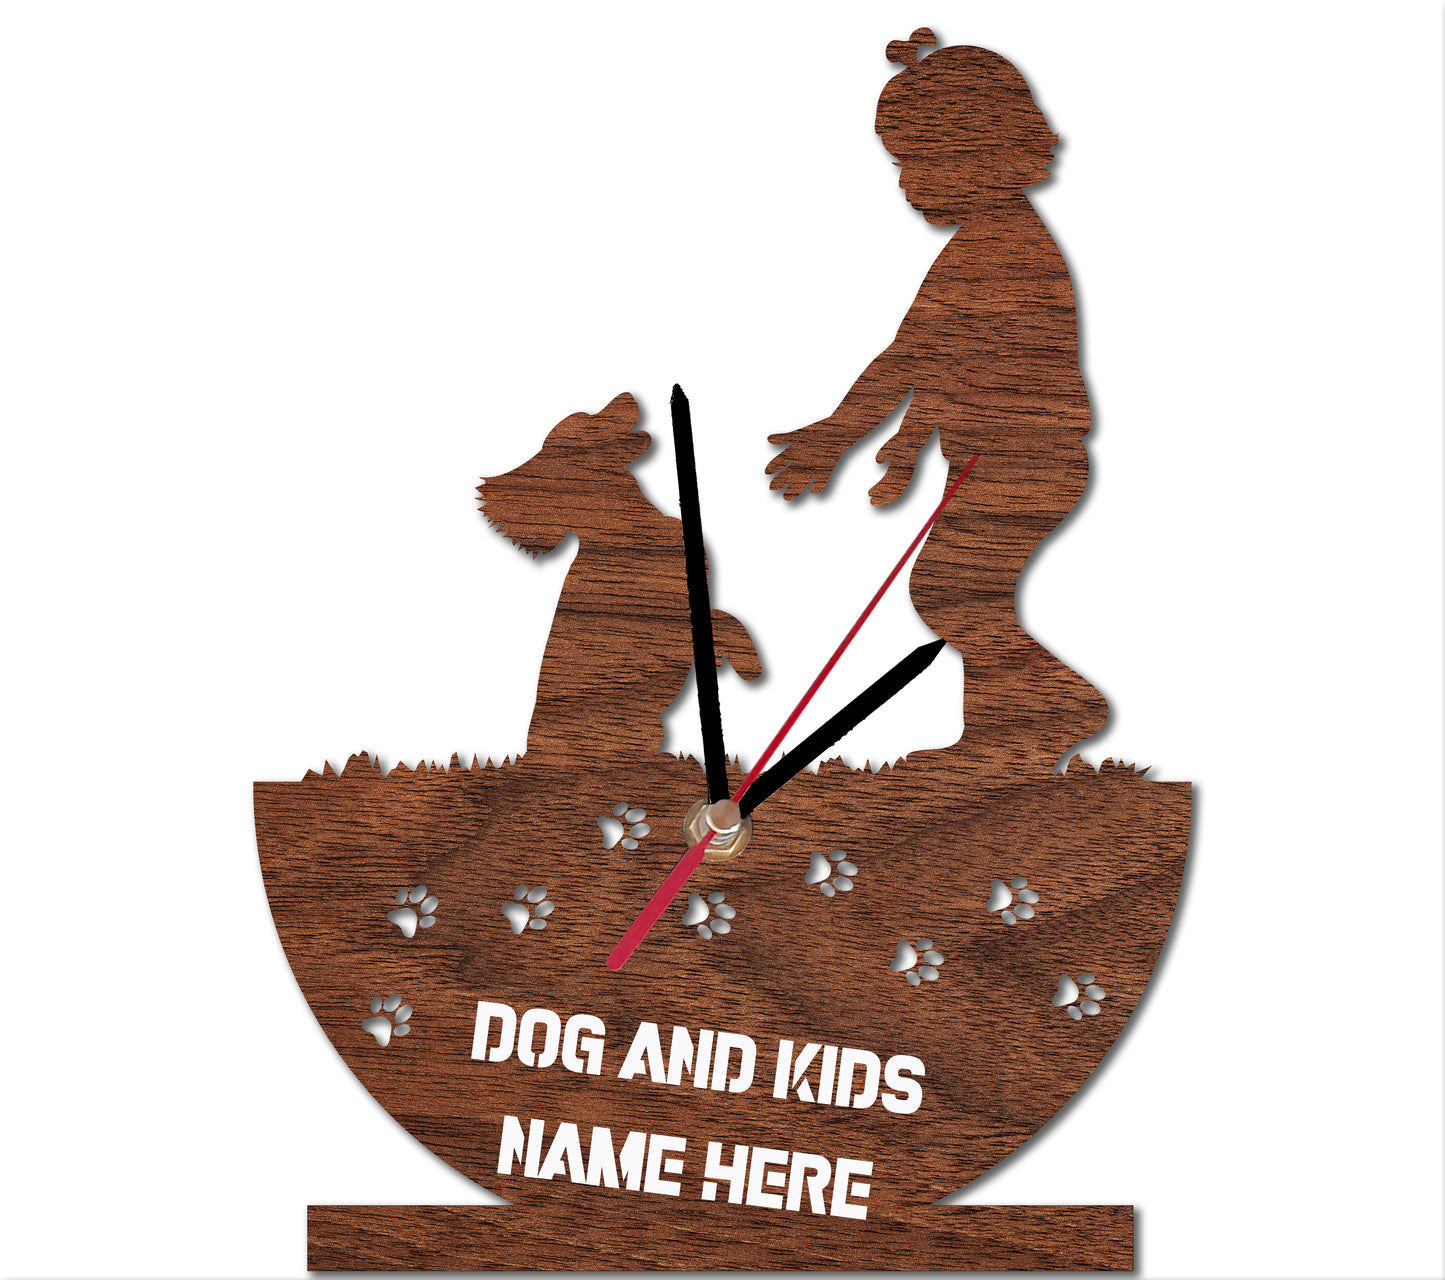 "PUPPY WITH GIRL" mantel clock